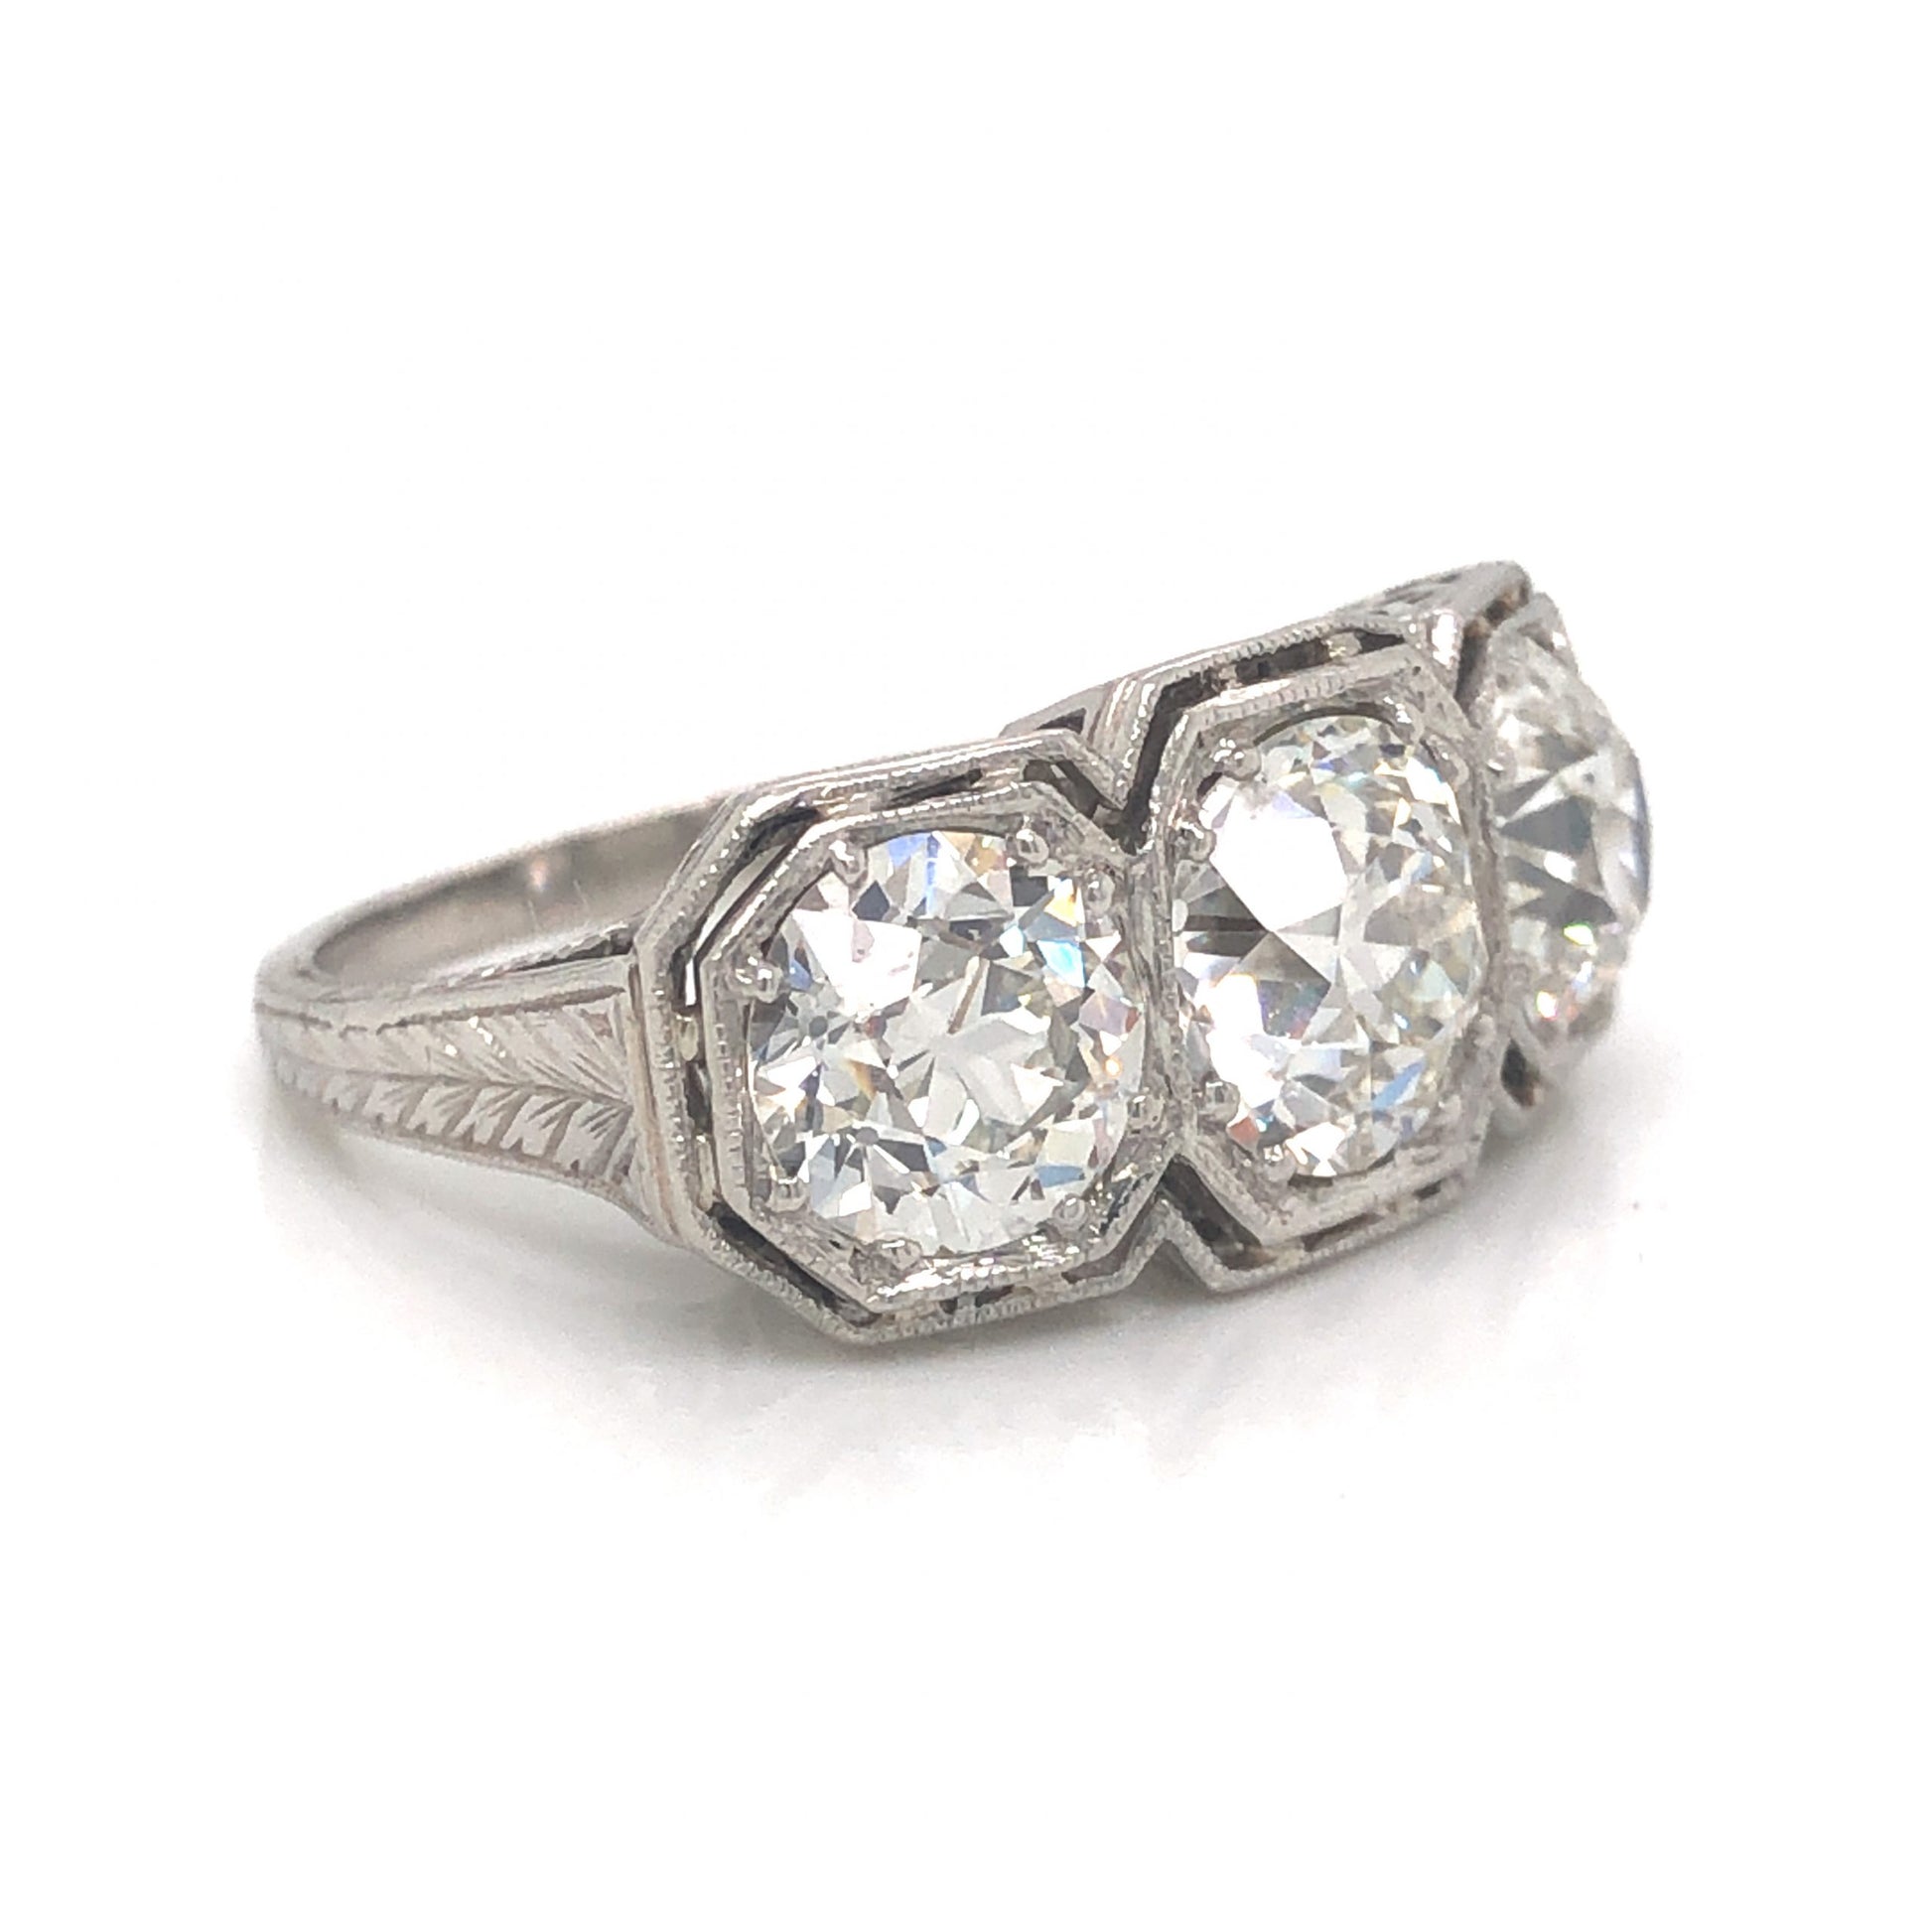 4.55 Old European Cut Diamond Cocktail Ring in PlatinumComposition: PlatinumRing Size: 6Total Diamond Weight: 4.55 ctTotal Gram Weight: 8.0 g